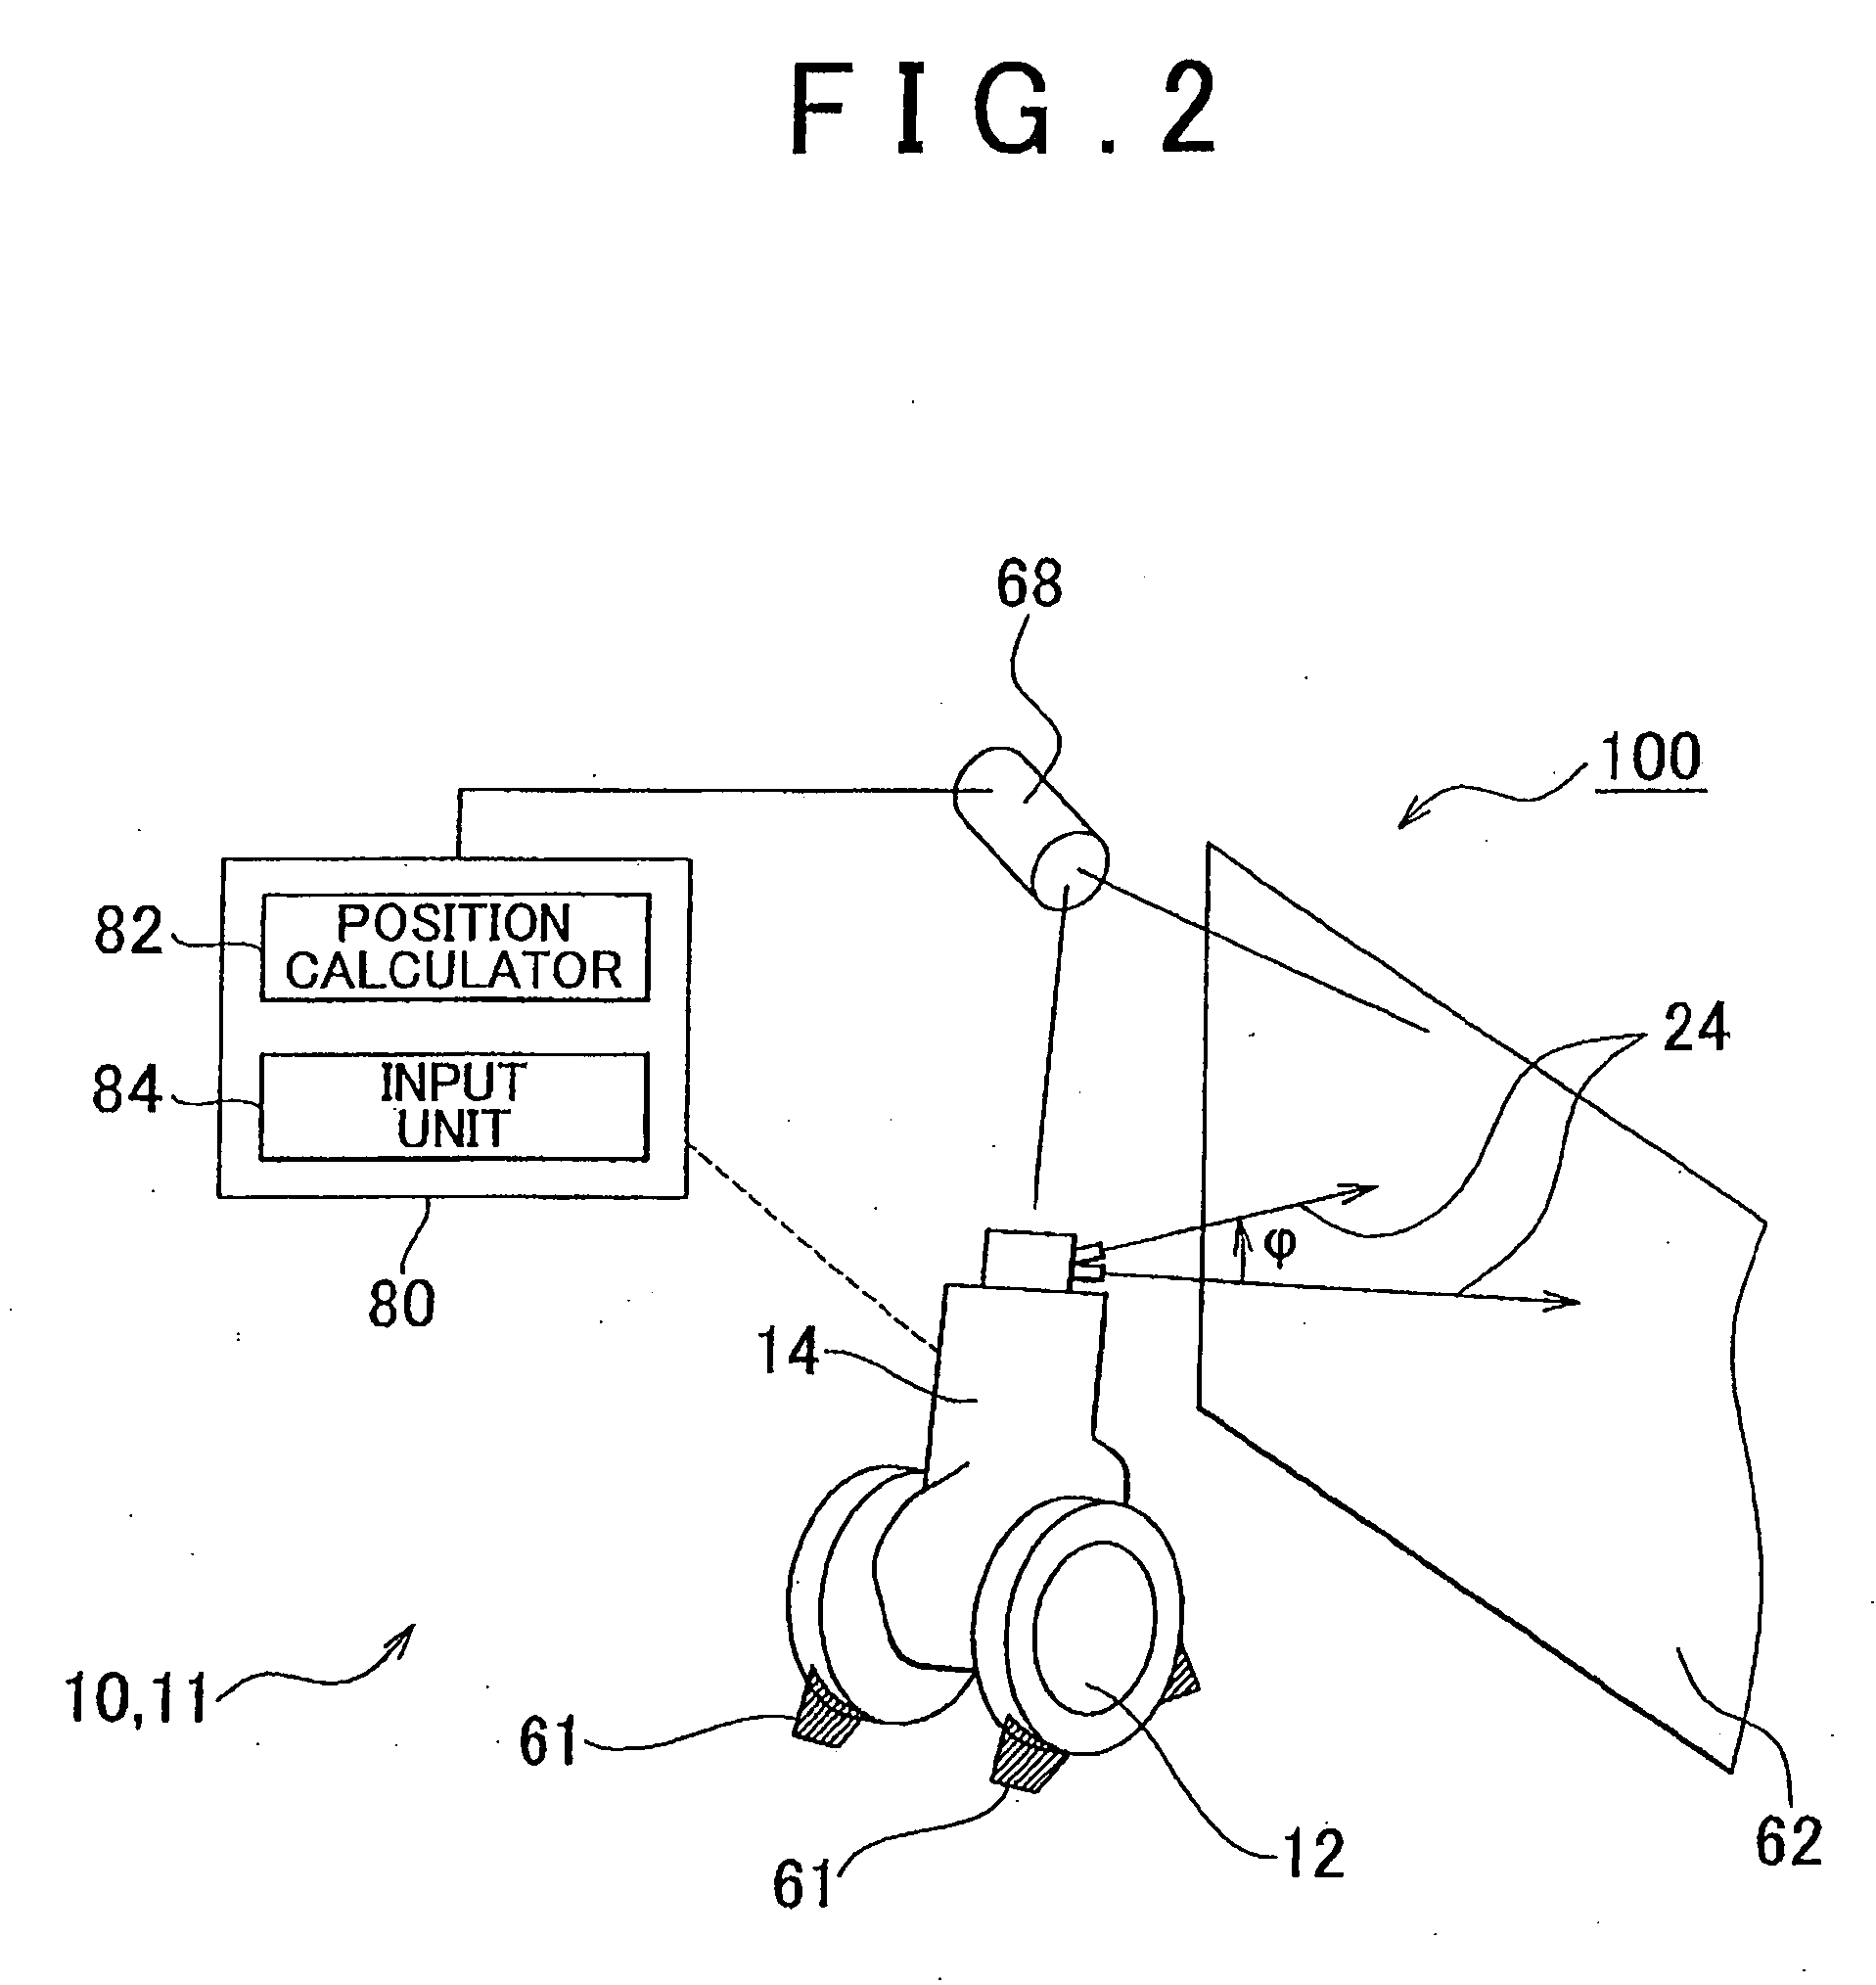 Robot Equipped with a Gyro and Gyro Calibration Apparatus, Program, and Method